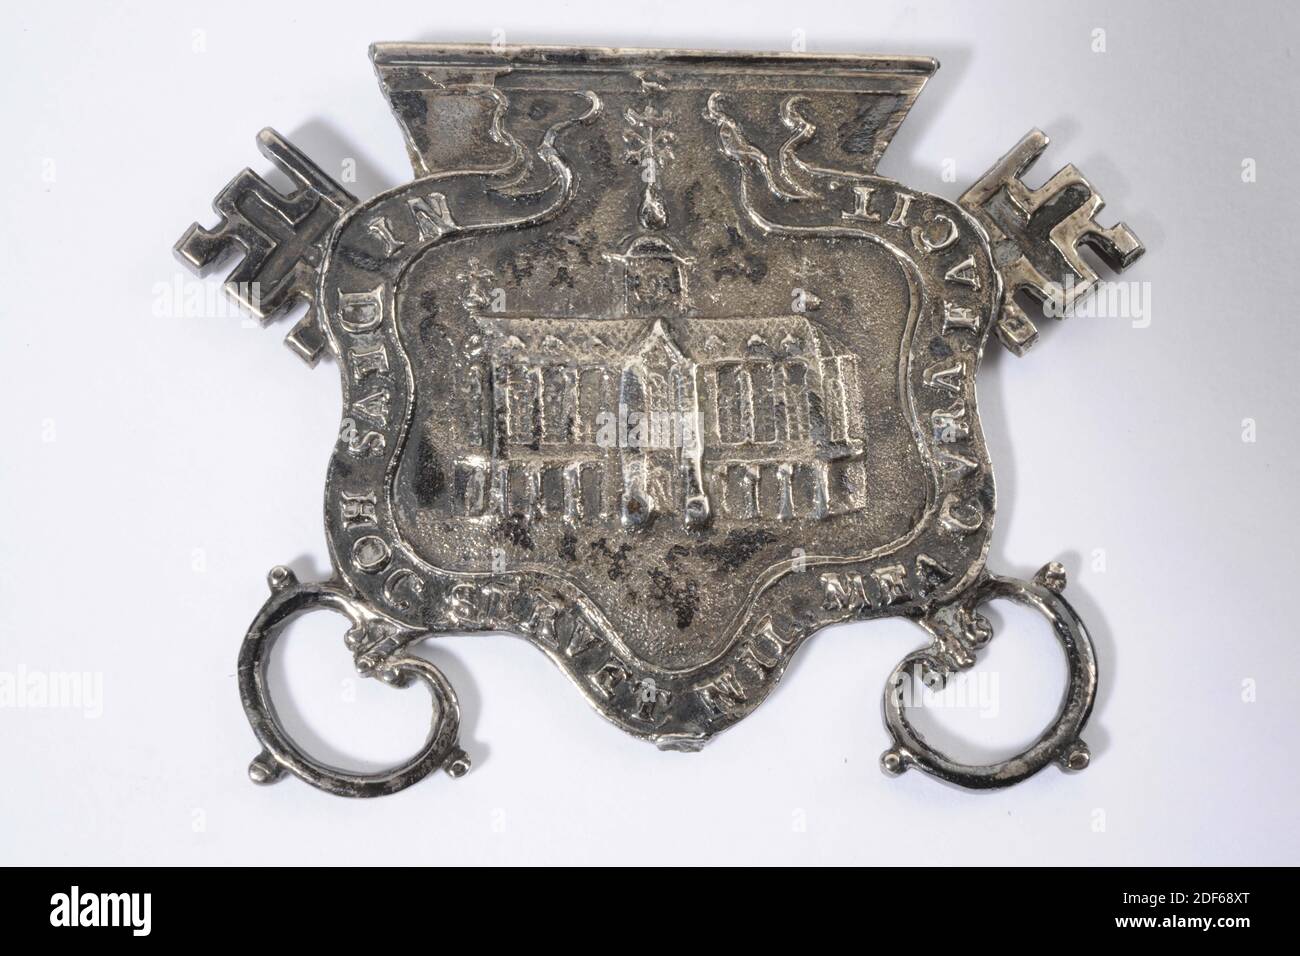 cleat, Anonymous, c. 1780, cast, General: 3.2 x 4.2 x 0.2cm (32 x 42 x 2mm), Clasp of a cast silver biblical lock depicting a cruciform basilica with celebration tower [presumably the Pieterskerk]. Around this performance is a ribbon or banderol with text: NI DEUS HOC SERVET NIL MEA CURA FACIT. Behind this two crossed keys, of which only the handle and the beard are visible. Unnoticed, church, key Stock Photo